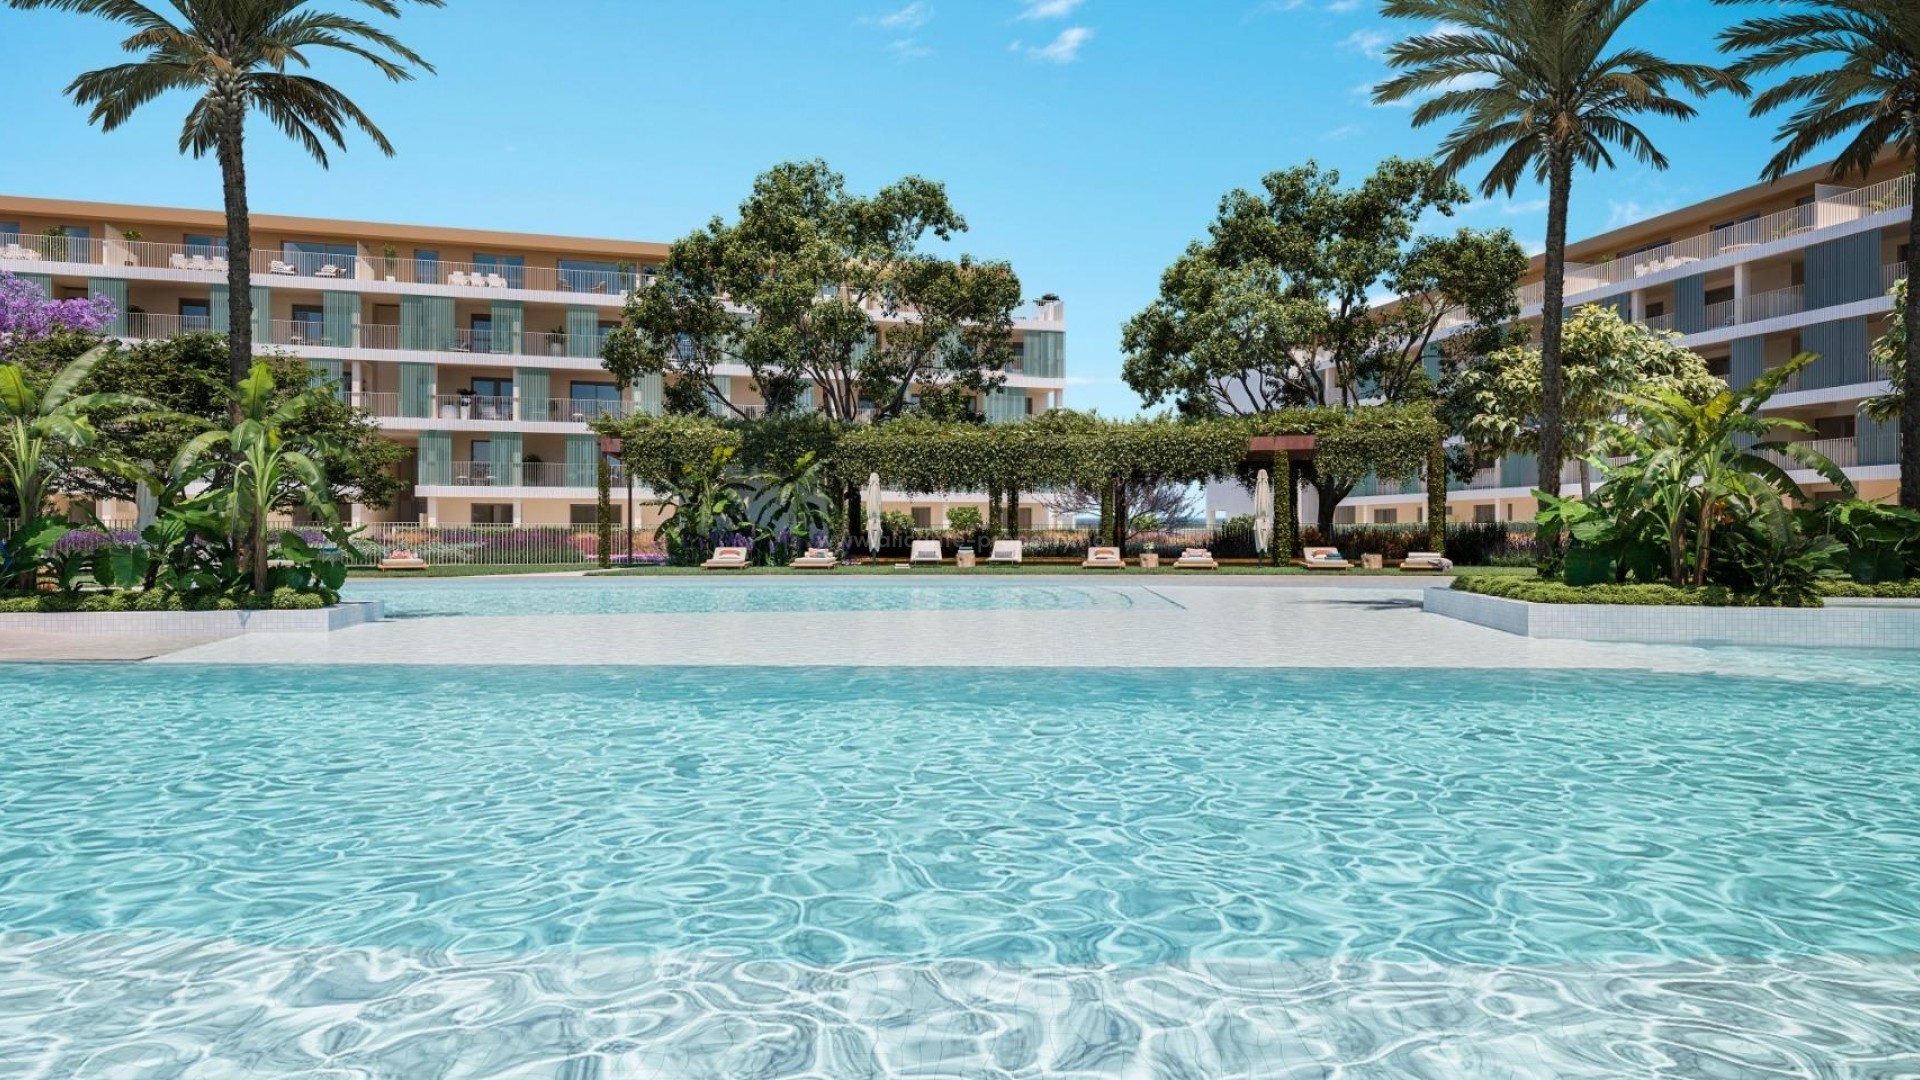 New exclusive residential complex in Denia, 2/3/4 bedrooms, 2 bathrooms, all apartments have a terrace, great communal swimming pool for both adults and children, nice view